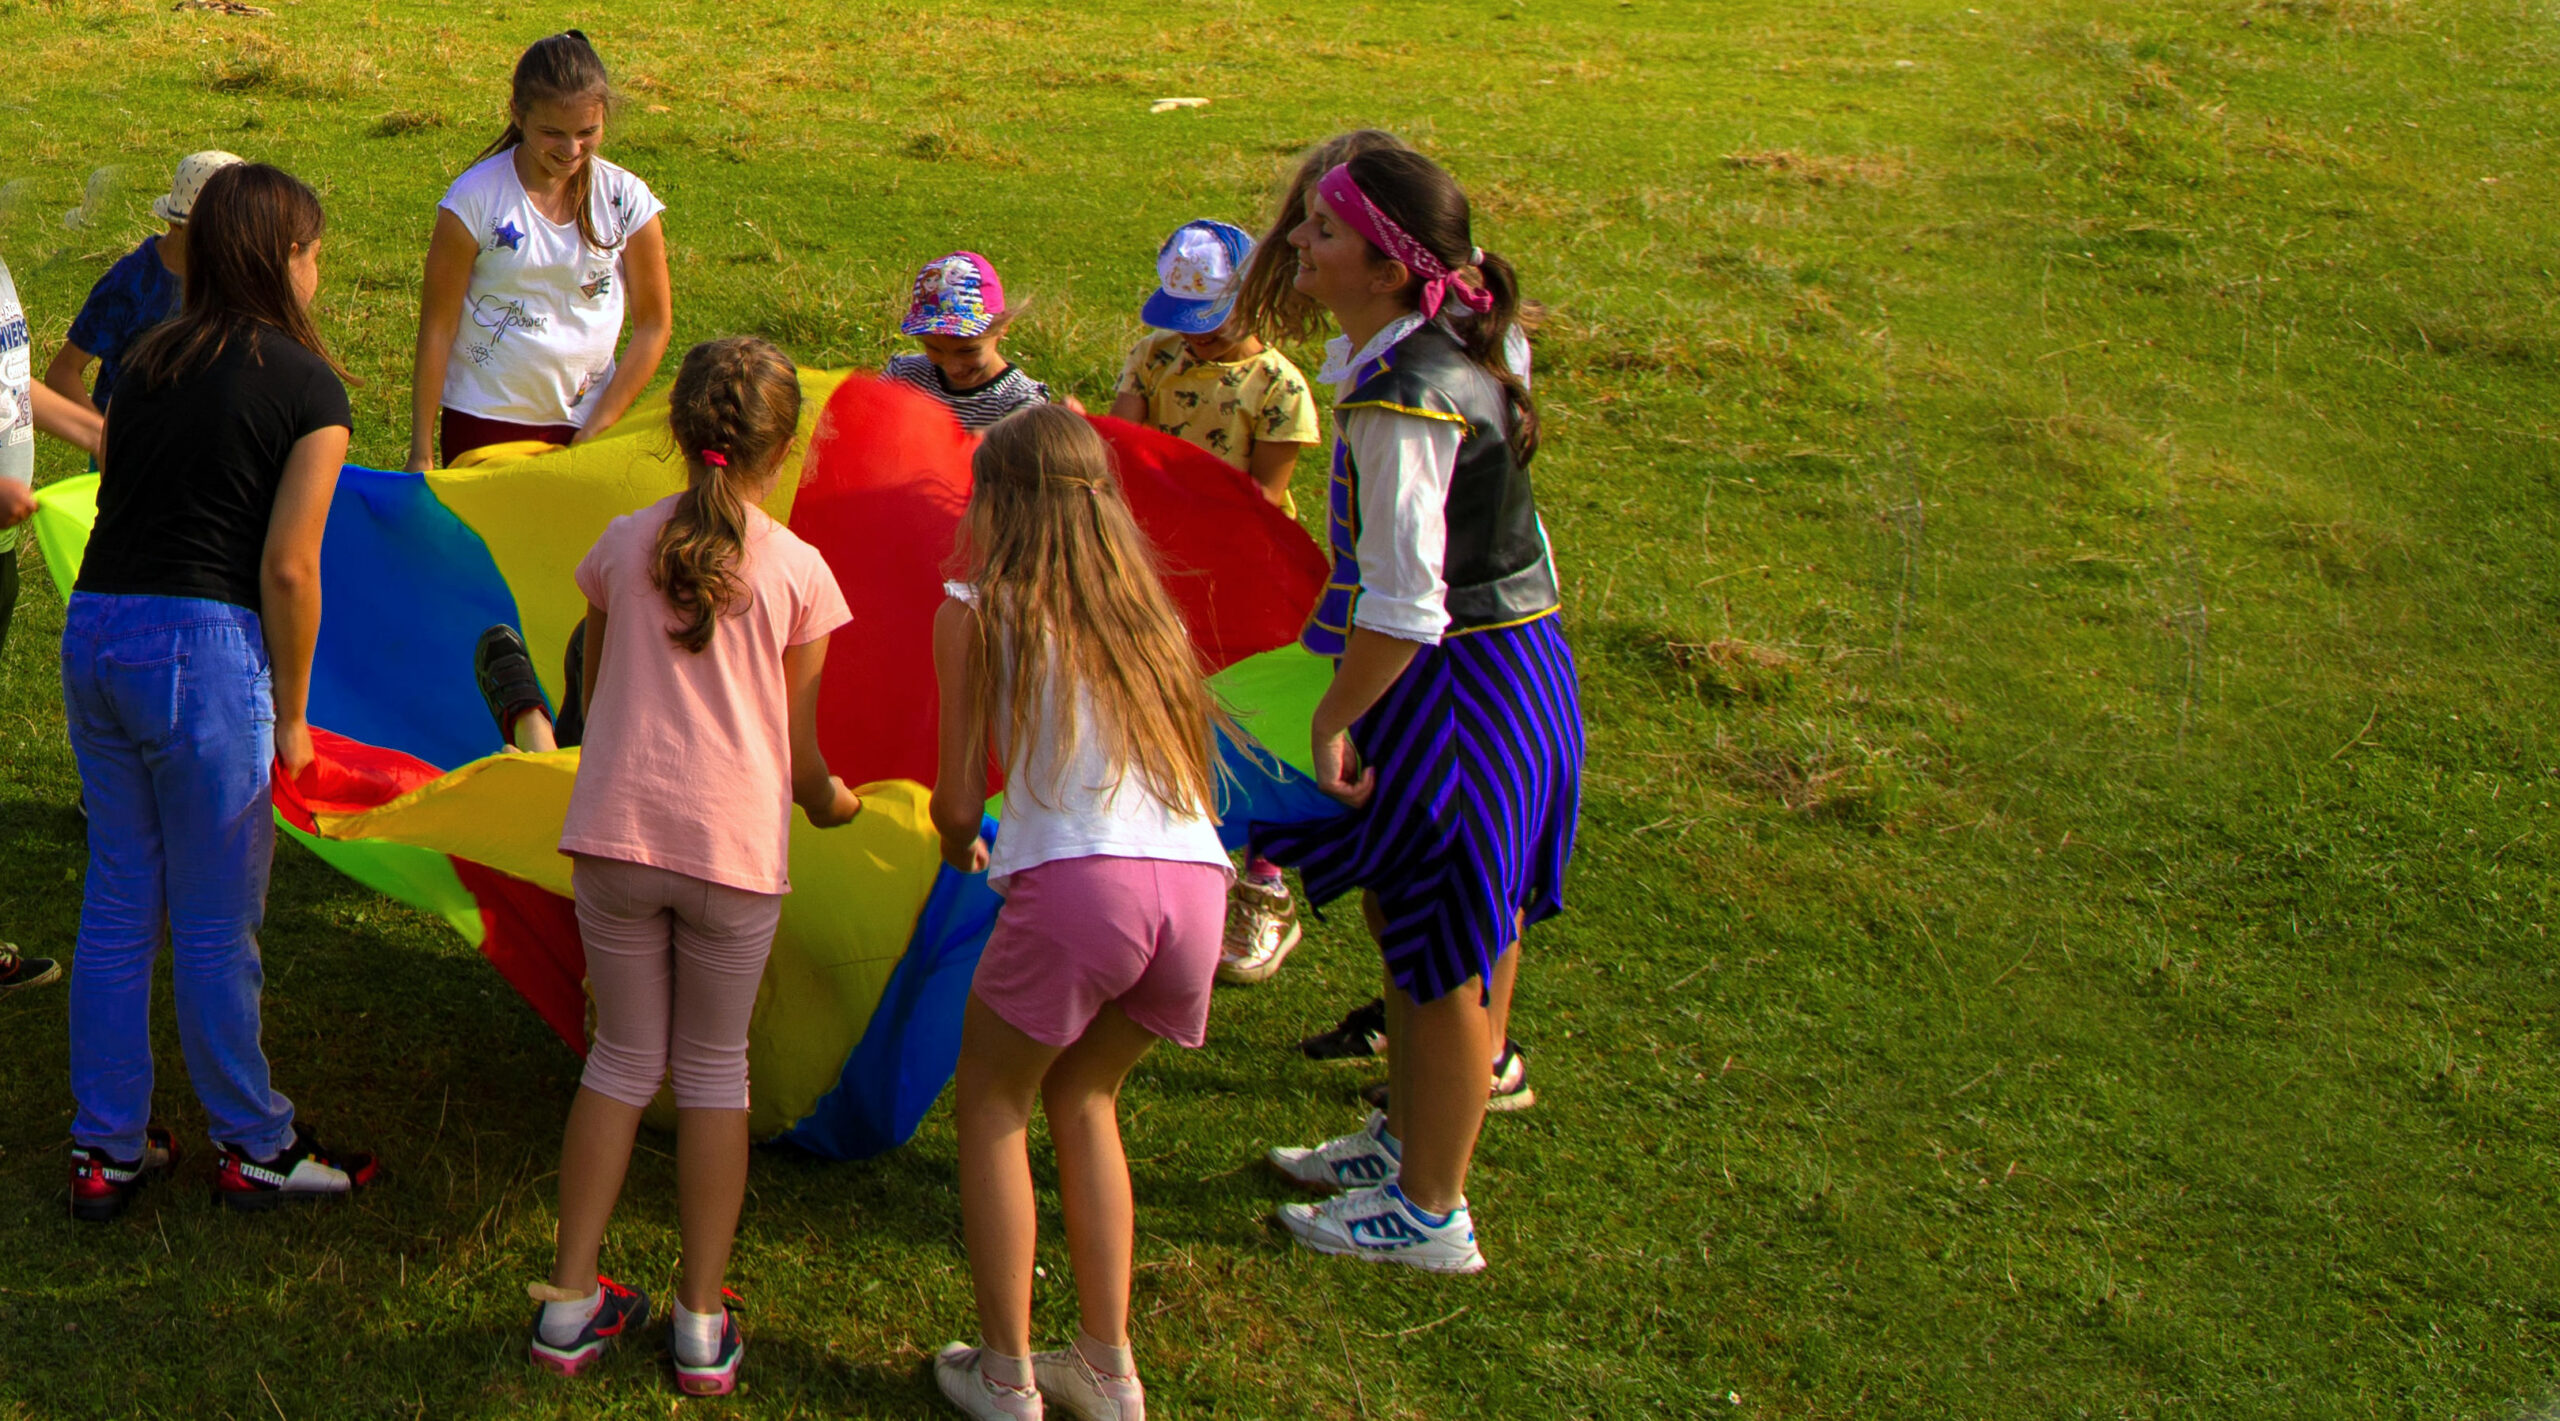 a group of adults and children in a park, holding a large, colourful groundsheet